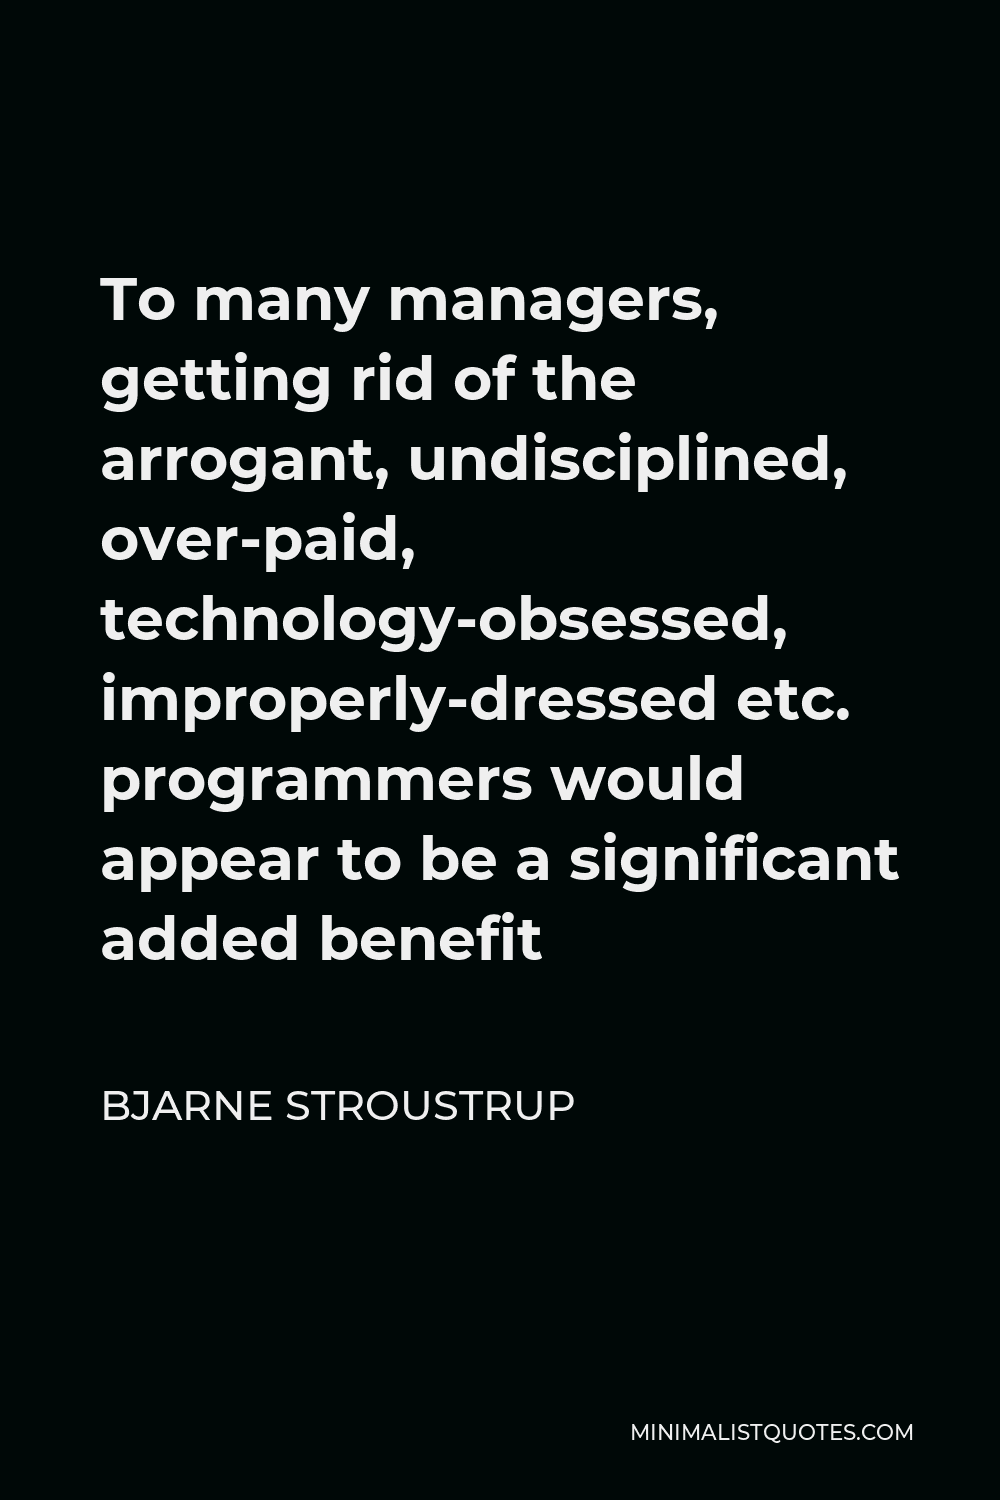 Bjarne Stroustrup Quote - To many managers, getting rid of the arrogant, undisciplined, over-paid, technology-obsessed, improperly-dressed etc. programmers would appear to be a significant added benefit